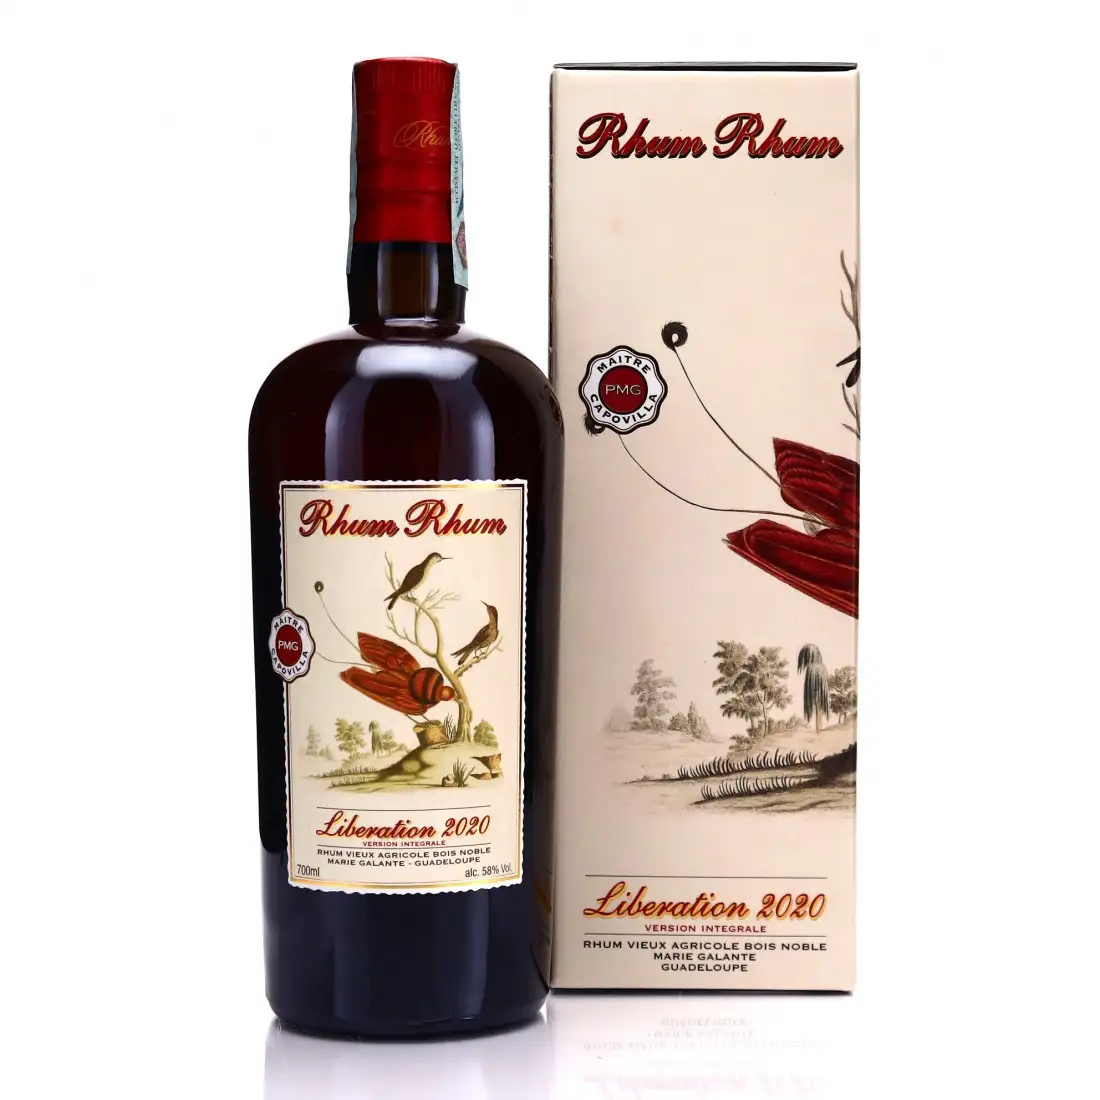 Image of the front of the bottle of the rum Rhum Rhum Libération Integrale 2020